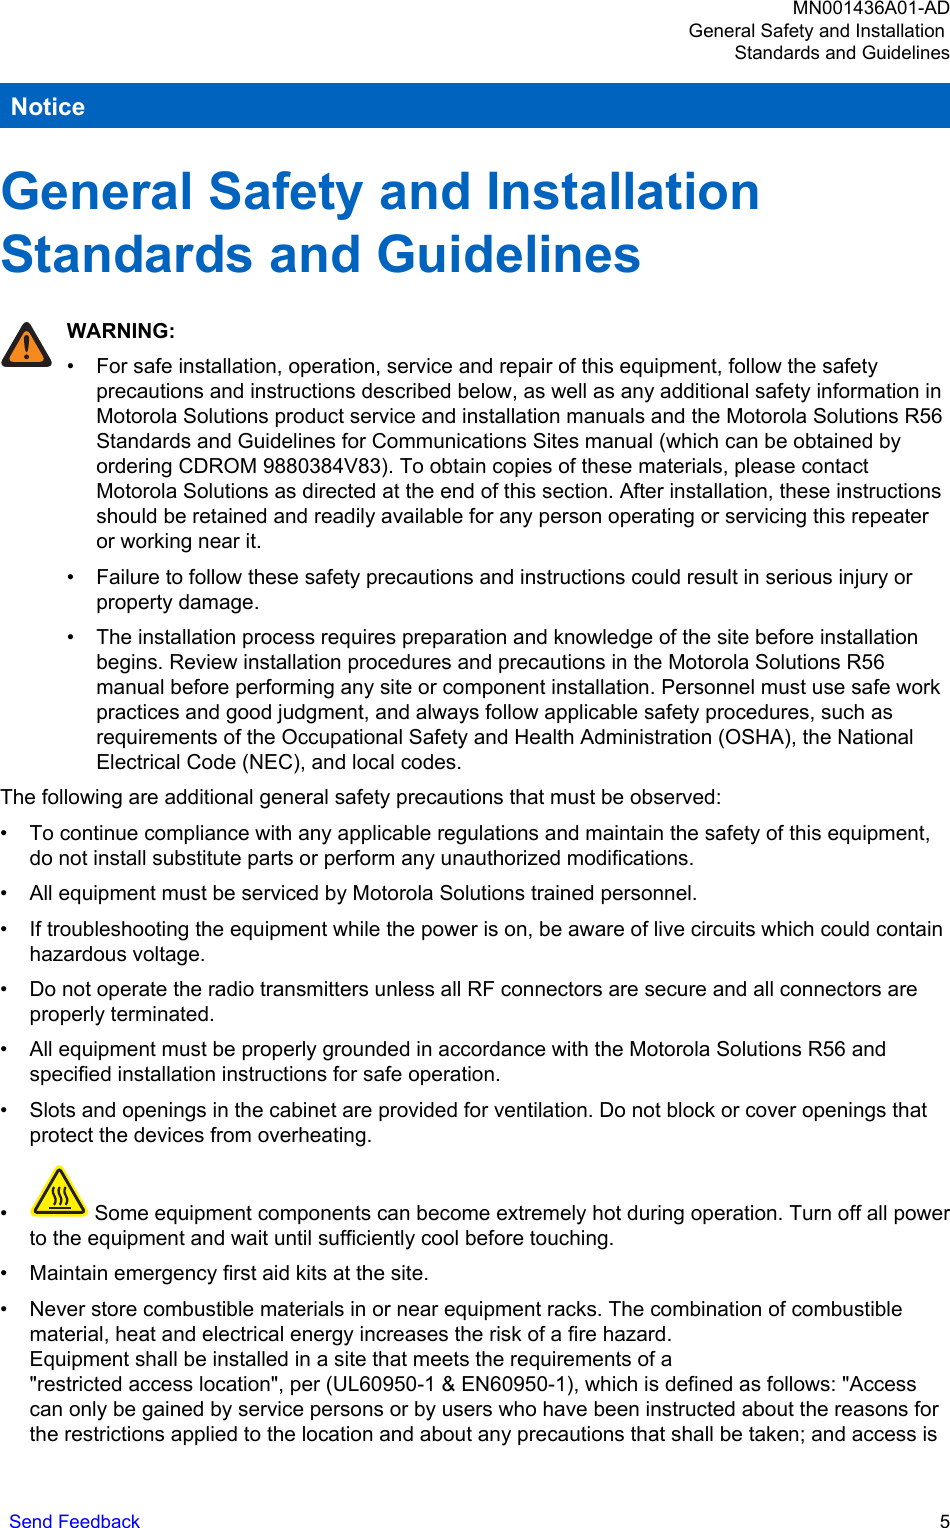 NoticeGeneral Safety and Installation Standards and GuidelinesWARNING:• For safe installation, operation, service and repair of this equipment, follow the safetyprecautions and instructions described below, as well as any additional safety information inMotorola Solutions product service and installation manuals and the Motorola Solutions R56Standards and Guidelines for Communications Sites manual (which can be obtained byordering CDROM 9880384V83). To obtain copies of these materials, please contactMotorola Solutions as directed at the end of this section. After installation, these instructionsshould be retained and readily available for any person operating or servicing this repeateror working near it.• Failure to follow these safety precautions and instructions could result in serious injury orproperty damage.• The installation process requires preparation and knowledge of the site before installationbegins. Review installation procedures and precautions in the Motorola Solutions R56manual before performing any site or component installation. Personnel must use safe workpractices and good judgment, and always follow applicable safety procedures, such asrequirements of the Occupational Safety and Health Administration (OSHA), the NationalElectrical Code (NEC), and local codes.The following are additional general safety precautions that must be observed:• To continue compliance with any applicable regulations and maintain the safety of this equipment,do not install substitute parts or perform any unauthorized modifications.• All equipment must be serviced by Motorola Solutions trained personnel.• If troubleshooting the equipment while the power is on, be aware of live circuits which could containhazardous voltage.• Do not operate the radio transmitters unless all RF connectors are secure and all connectors areproperly terminated.• All equipment must be properly grounded in accordance with the Motorola Solutions R56 andspecified installation instructions for safe operation.• Slots and openings in the cabinet are provided for ventilation. Do not block or cover openings thatprotect the devices from overheating.• Some equipment components can become extremely hot during operation. Turn off all powerto the equipment and wait until sufficiently cool before touching.• Maintain emergency first aid kits at the site.• Never store combustible materials in or near equipment racks. The combination of combustiblematerial, heat and electrical energy increases the risk of a fire hazard.Equipment shall be installed in a site that meets the requirements of a &quot;restricted access location&quot;, per (UL60950-1 &amp; EN60950-1), which is defined as follows: &quot;Accesscan only be gained by service persons or by users who have been instructed about the reasons forthe restrictions applied to the location and about any precautions that shall be taken; and access isMN001436A01-ADGeneral Safety and Installation Standards and GuidelinesSend Feedback   5